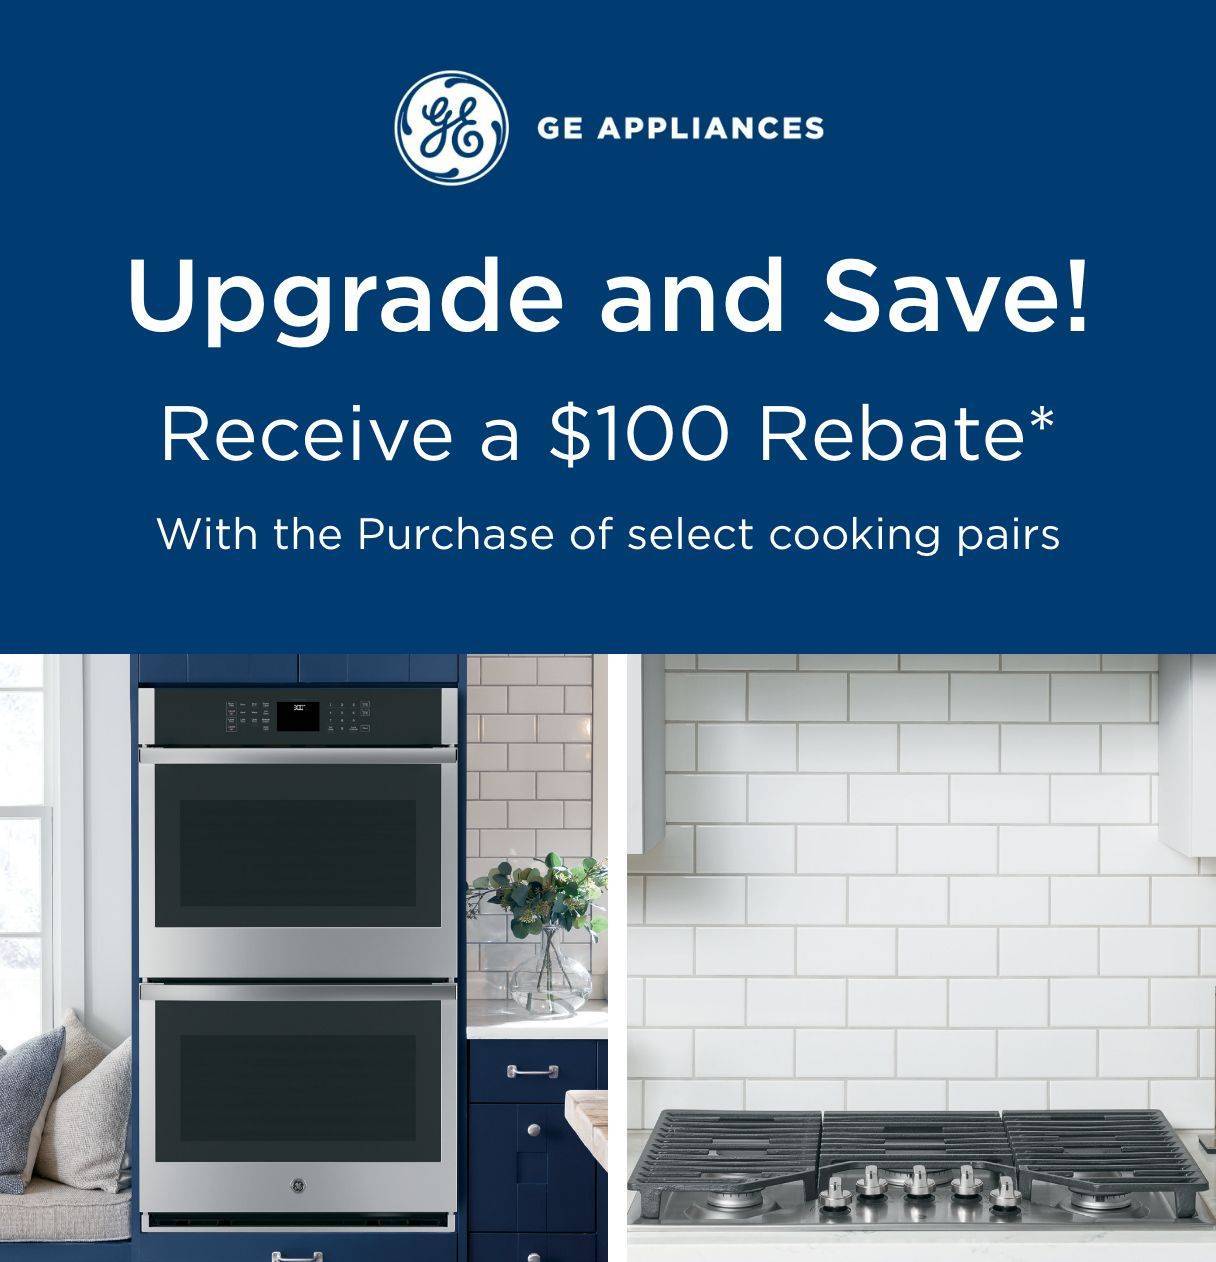 Special Offer: GE Appliances FIT Guarantee - get up to $300 toward teh cost of professional modifications to your kitchen cabinets or countertop.